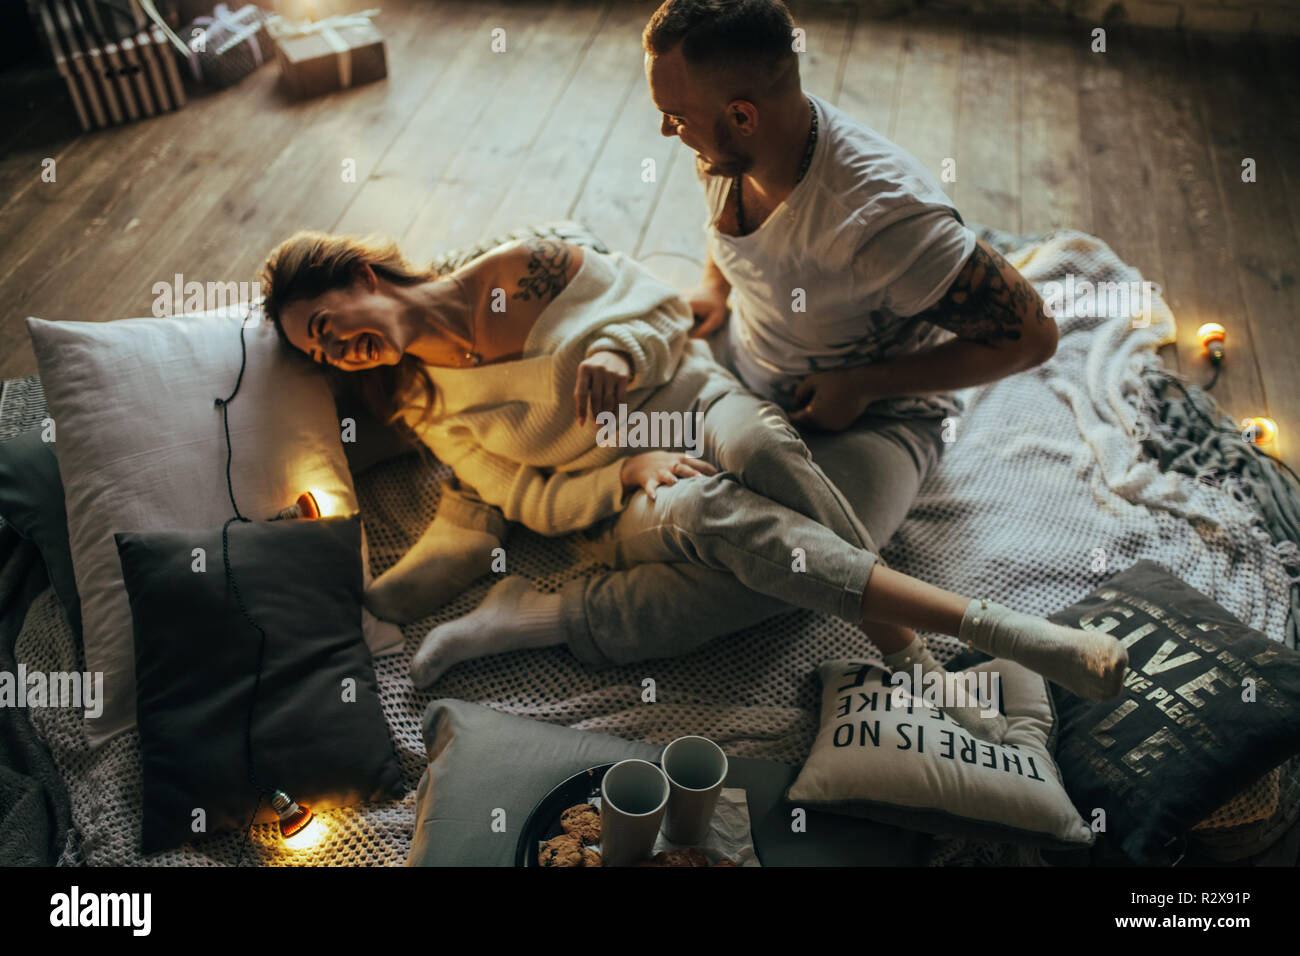 Young couple in love having fun and laughing cheerfully on background of wooden floor, coverlet, pillows and glowing lightbulbs. Stock Photo